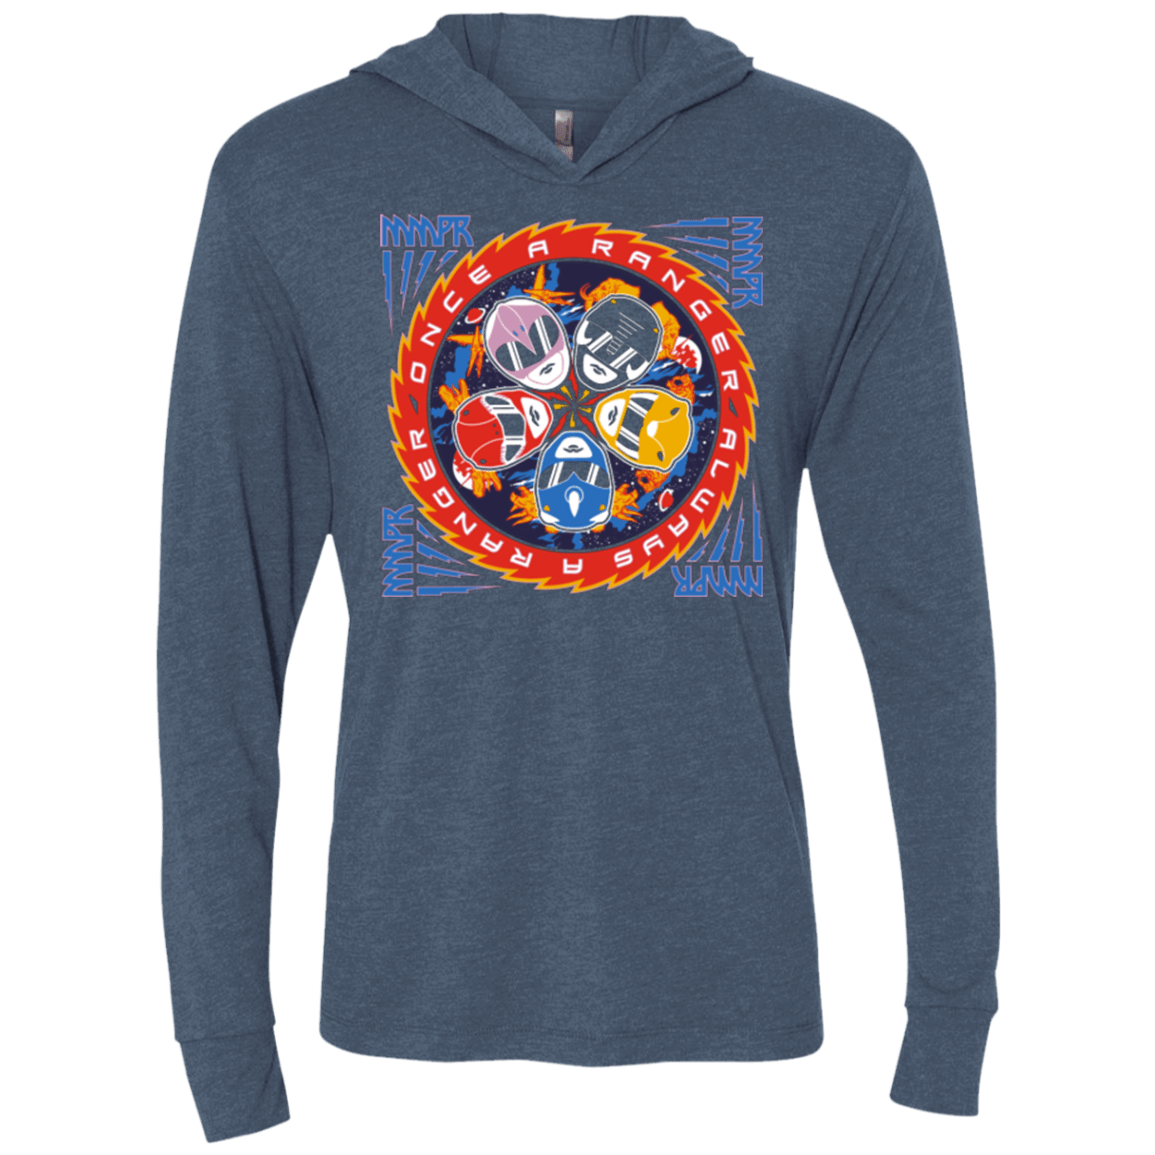 T-Shirts Indigo / X-Small Ranger and Roll Over Triblend Long Sleeve Hoodie Tee